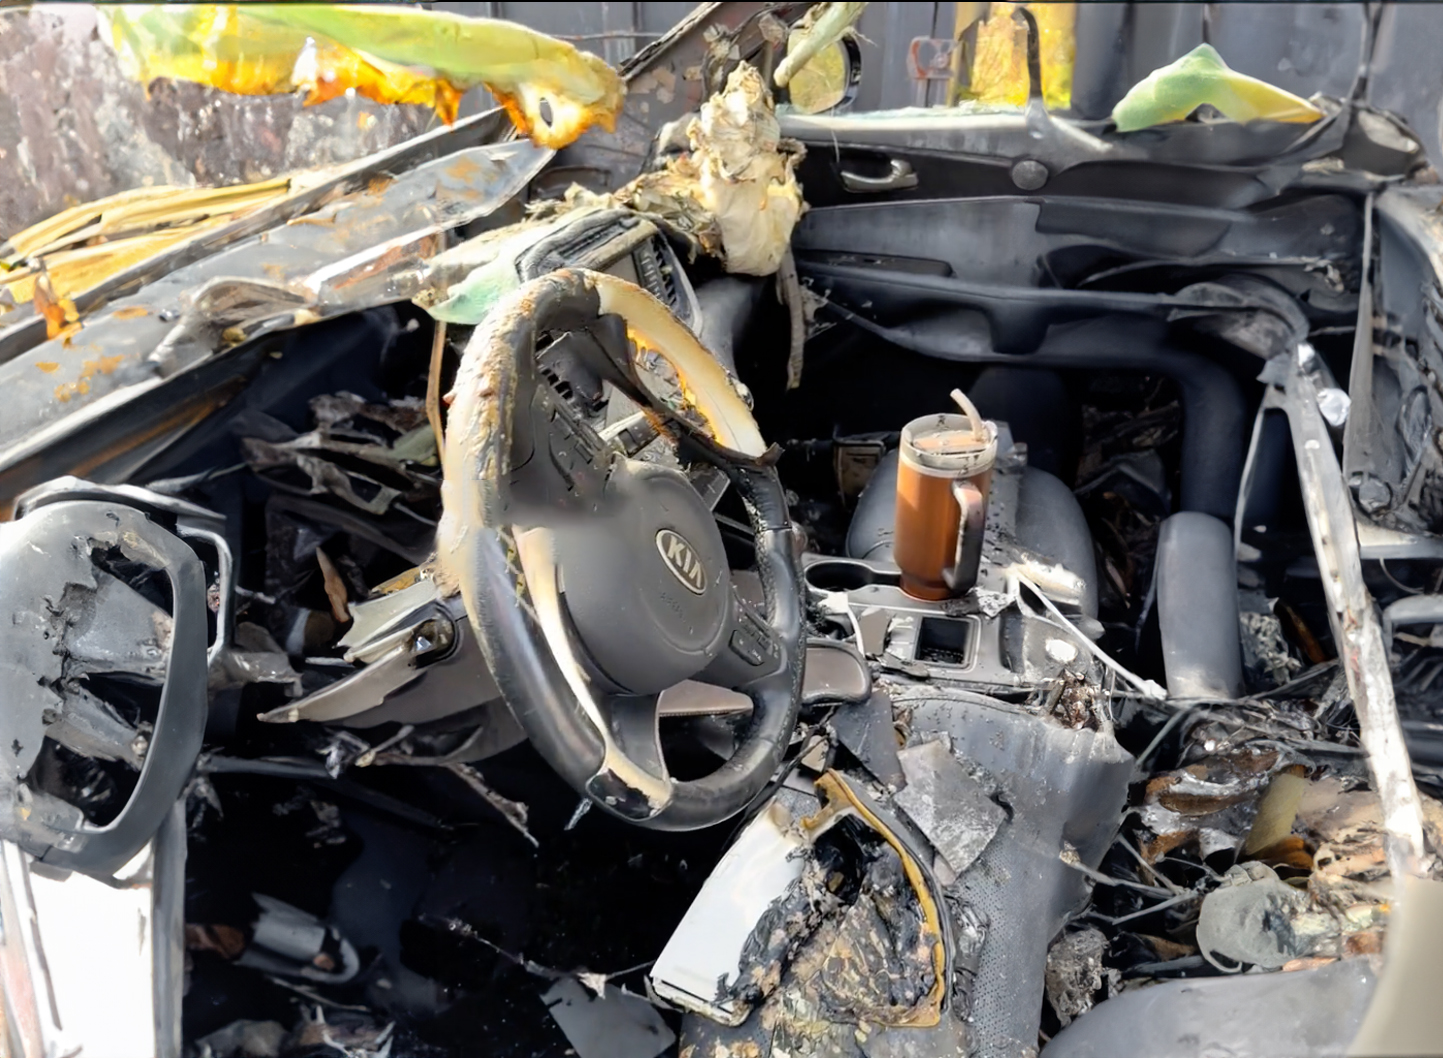 Stanley Tumbler Defies Flames in Kia, Prompts Generous Compensation for Car Owner